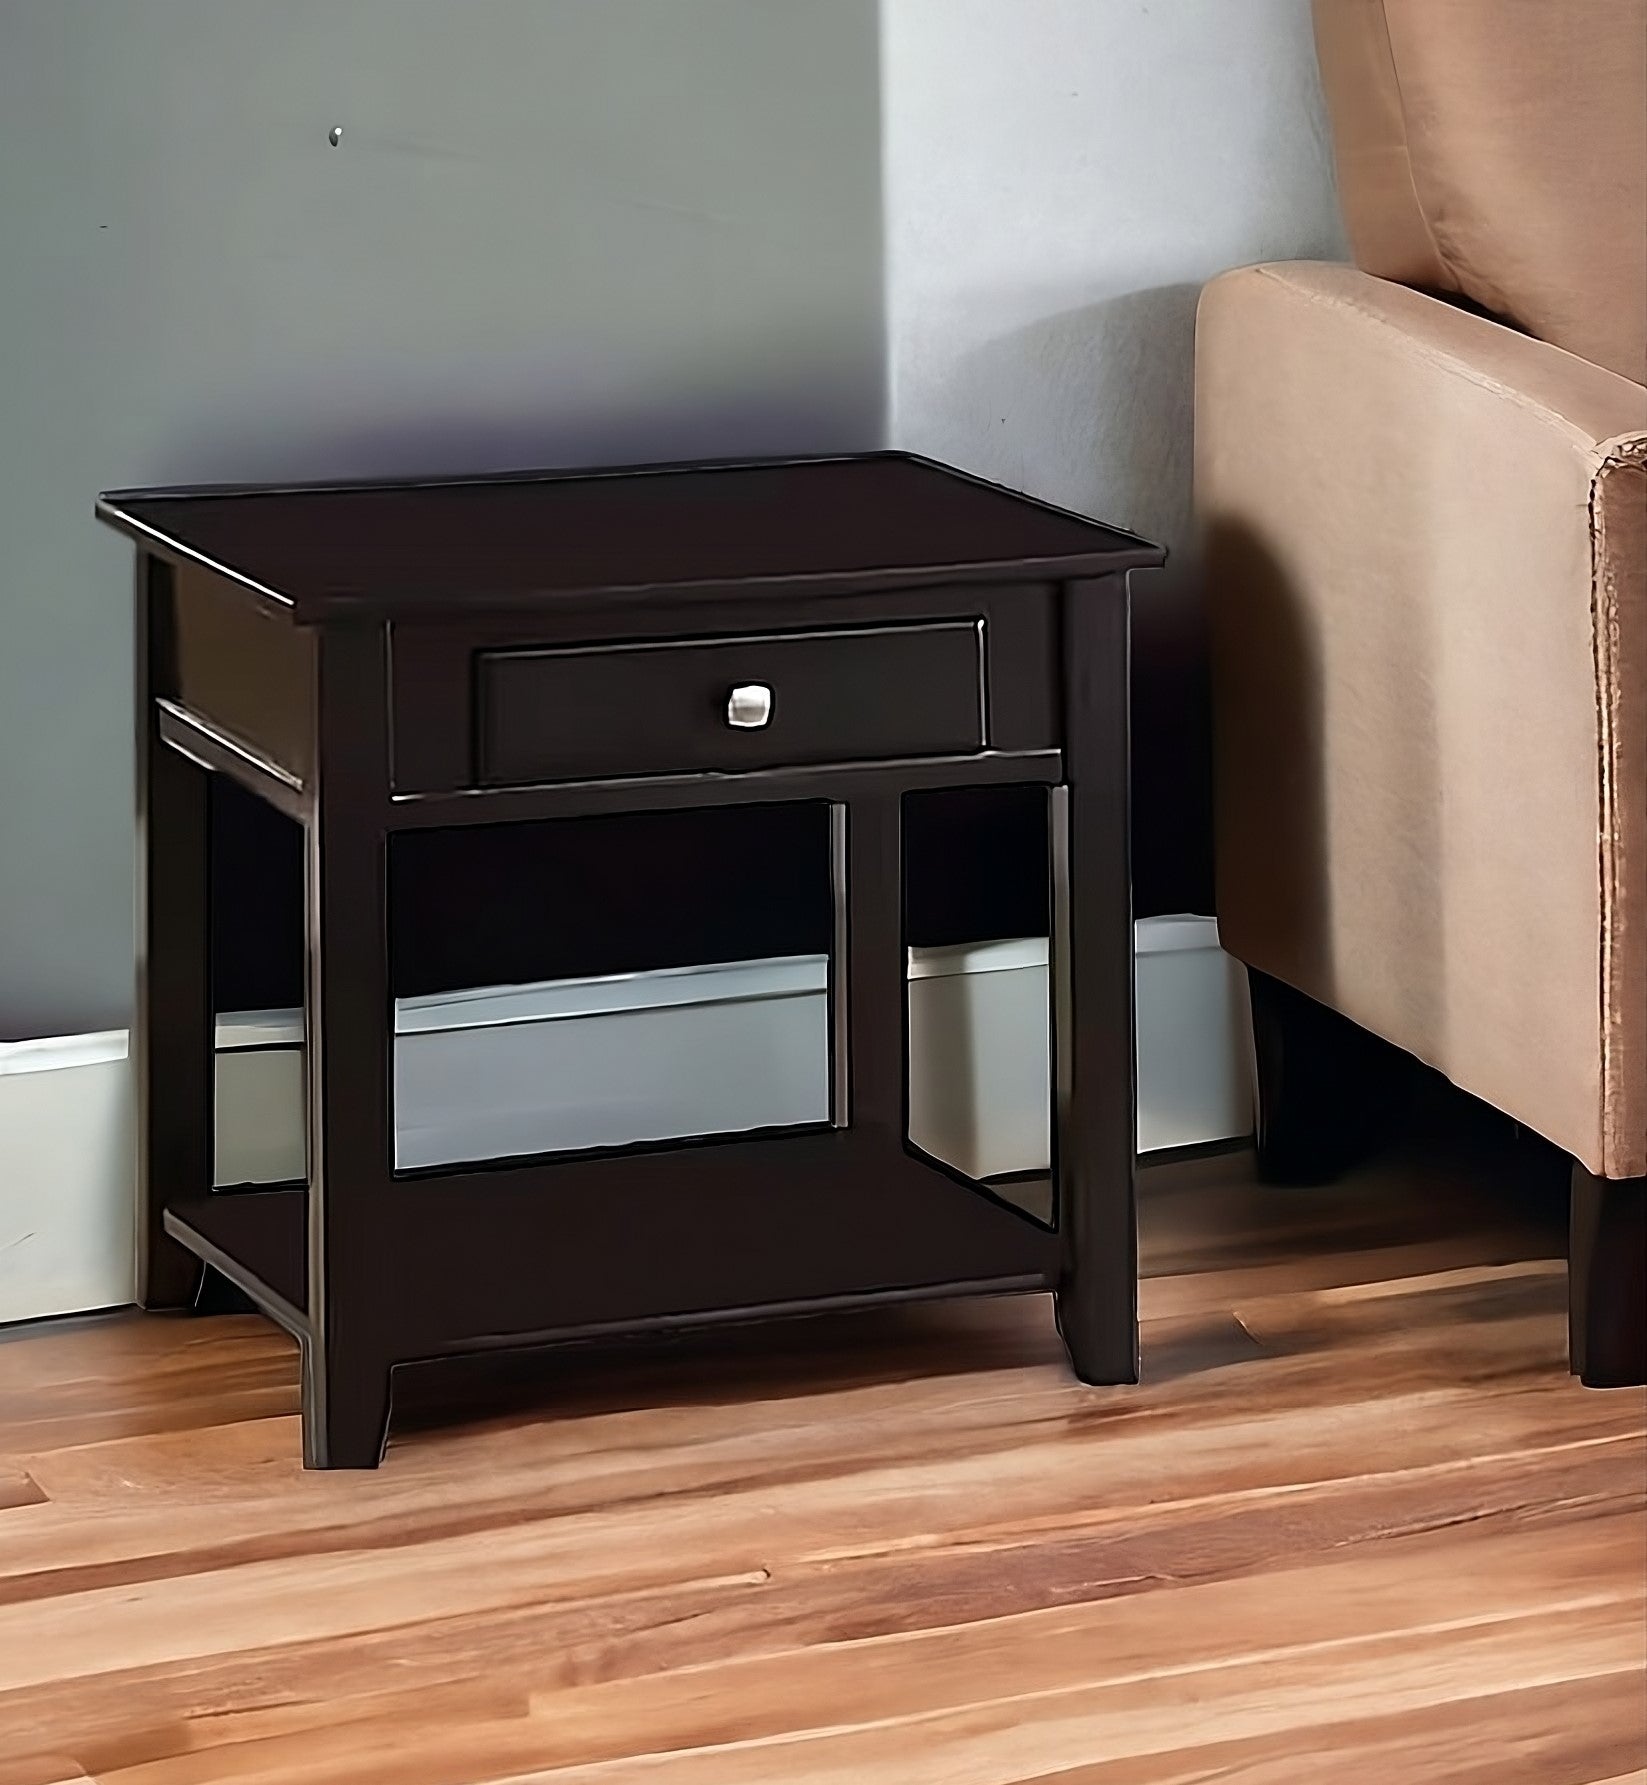 22" Black Manufactured Wood Square End Table With Drawer With Shelf